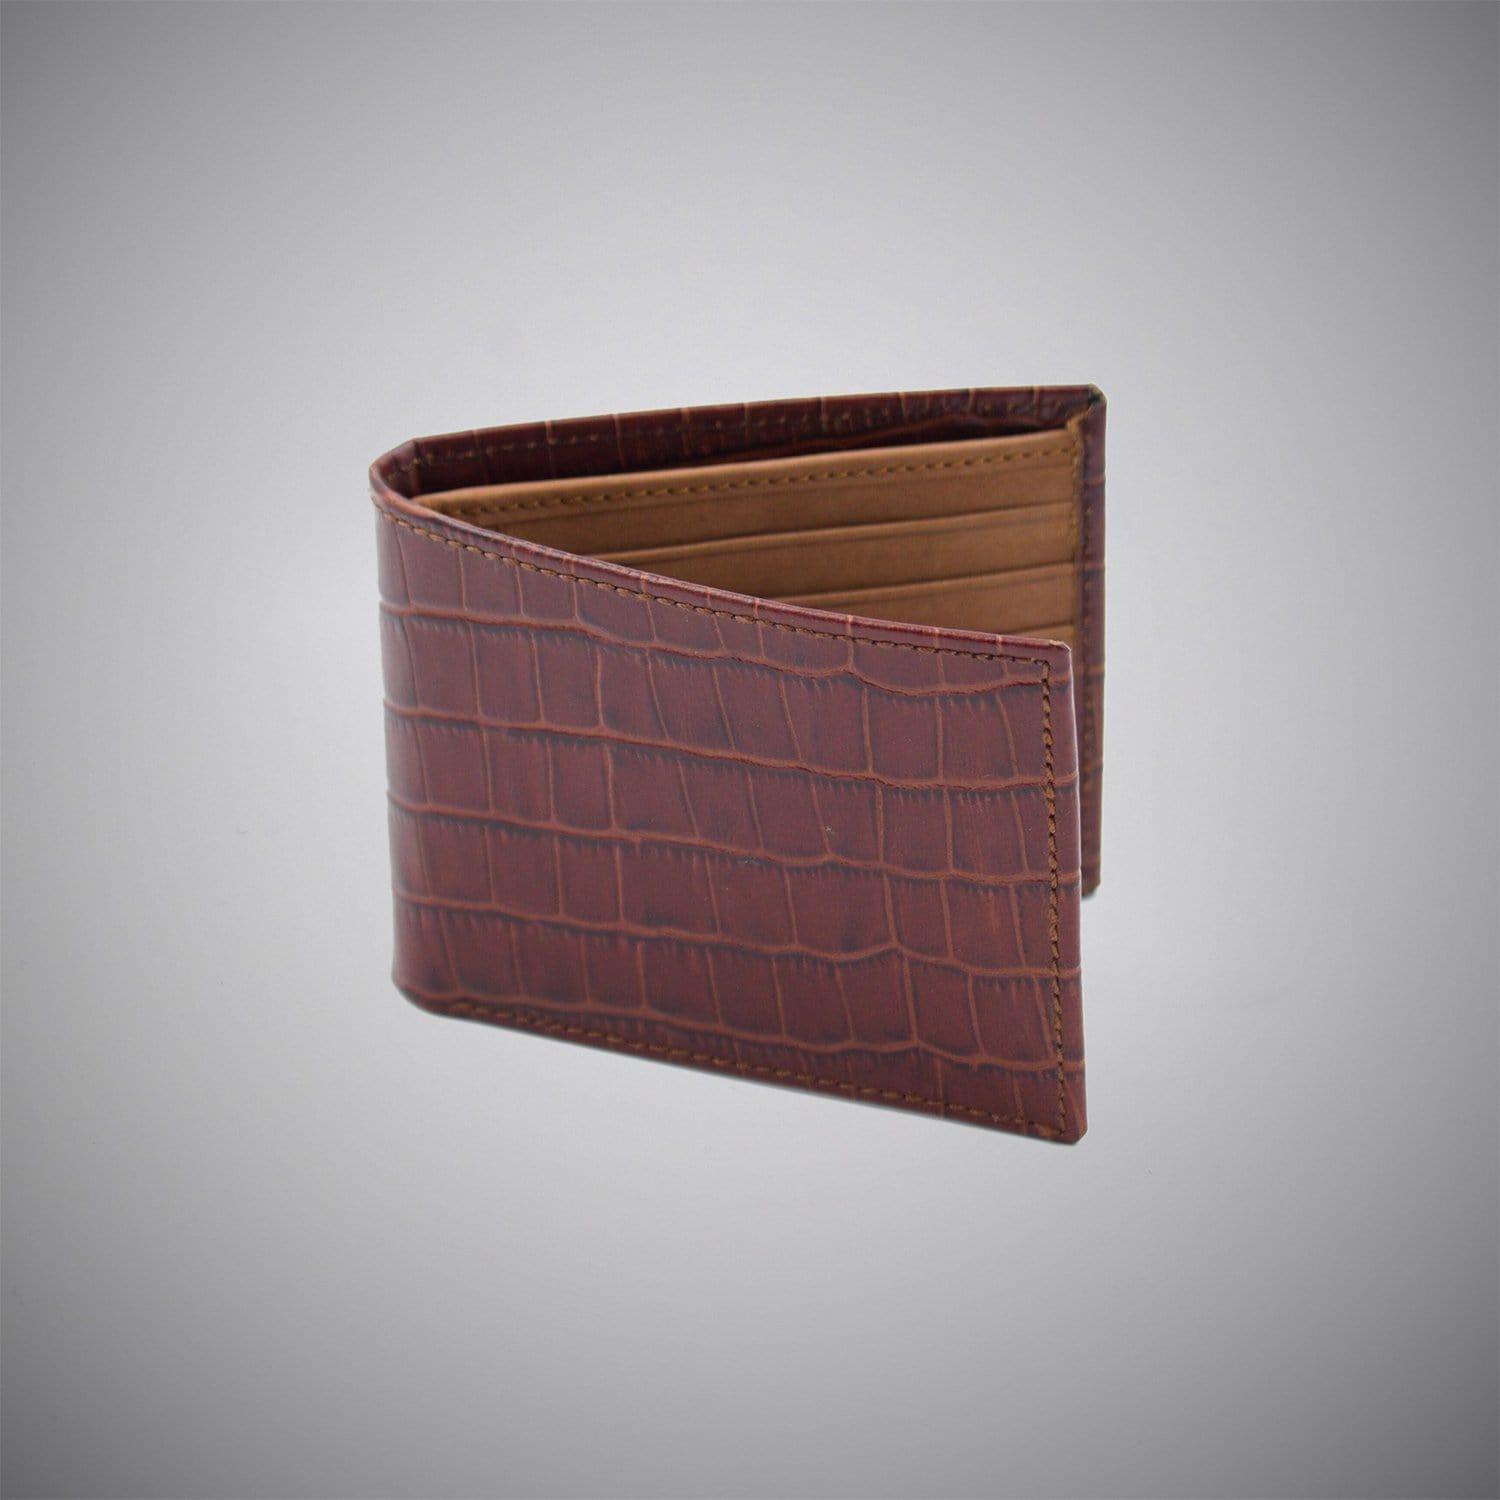 Oxblood Embossed Calf Leather Wallet With Tan Suede Interior - Just White Shirts